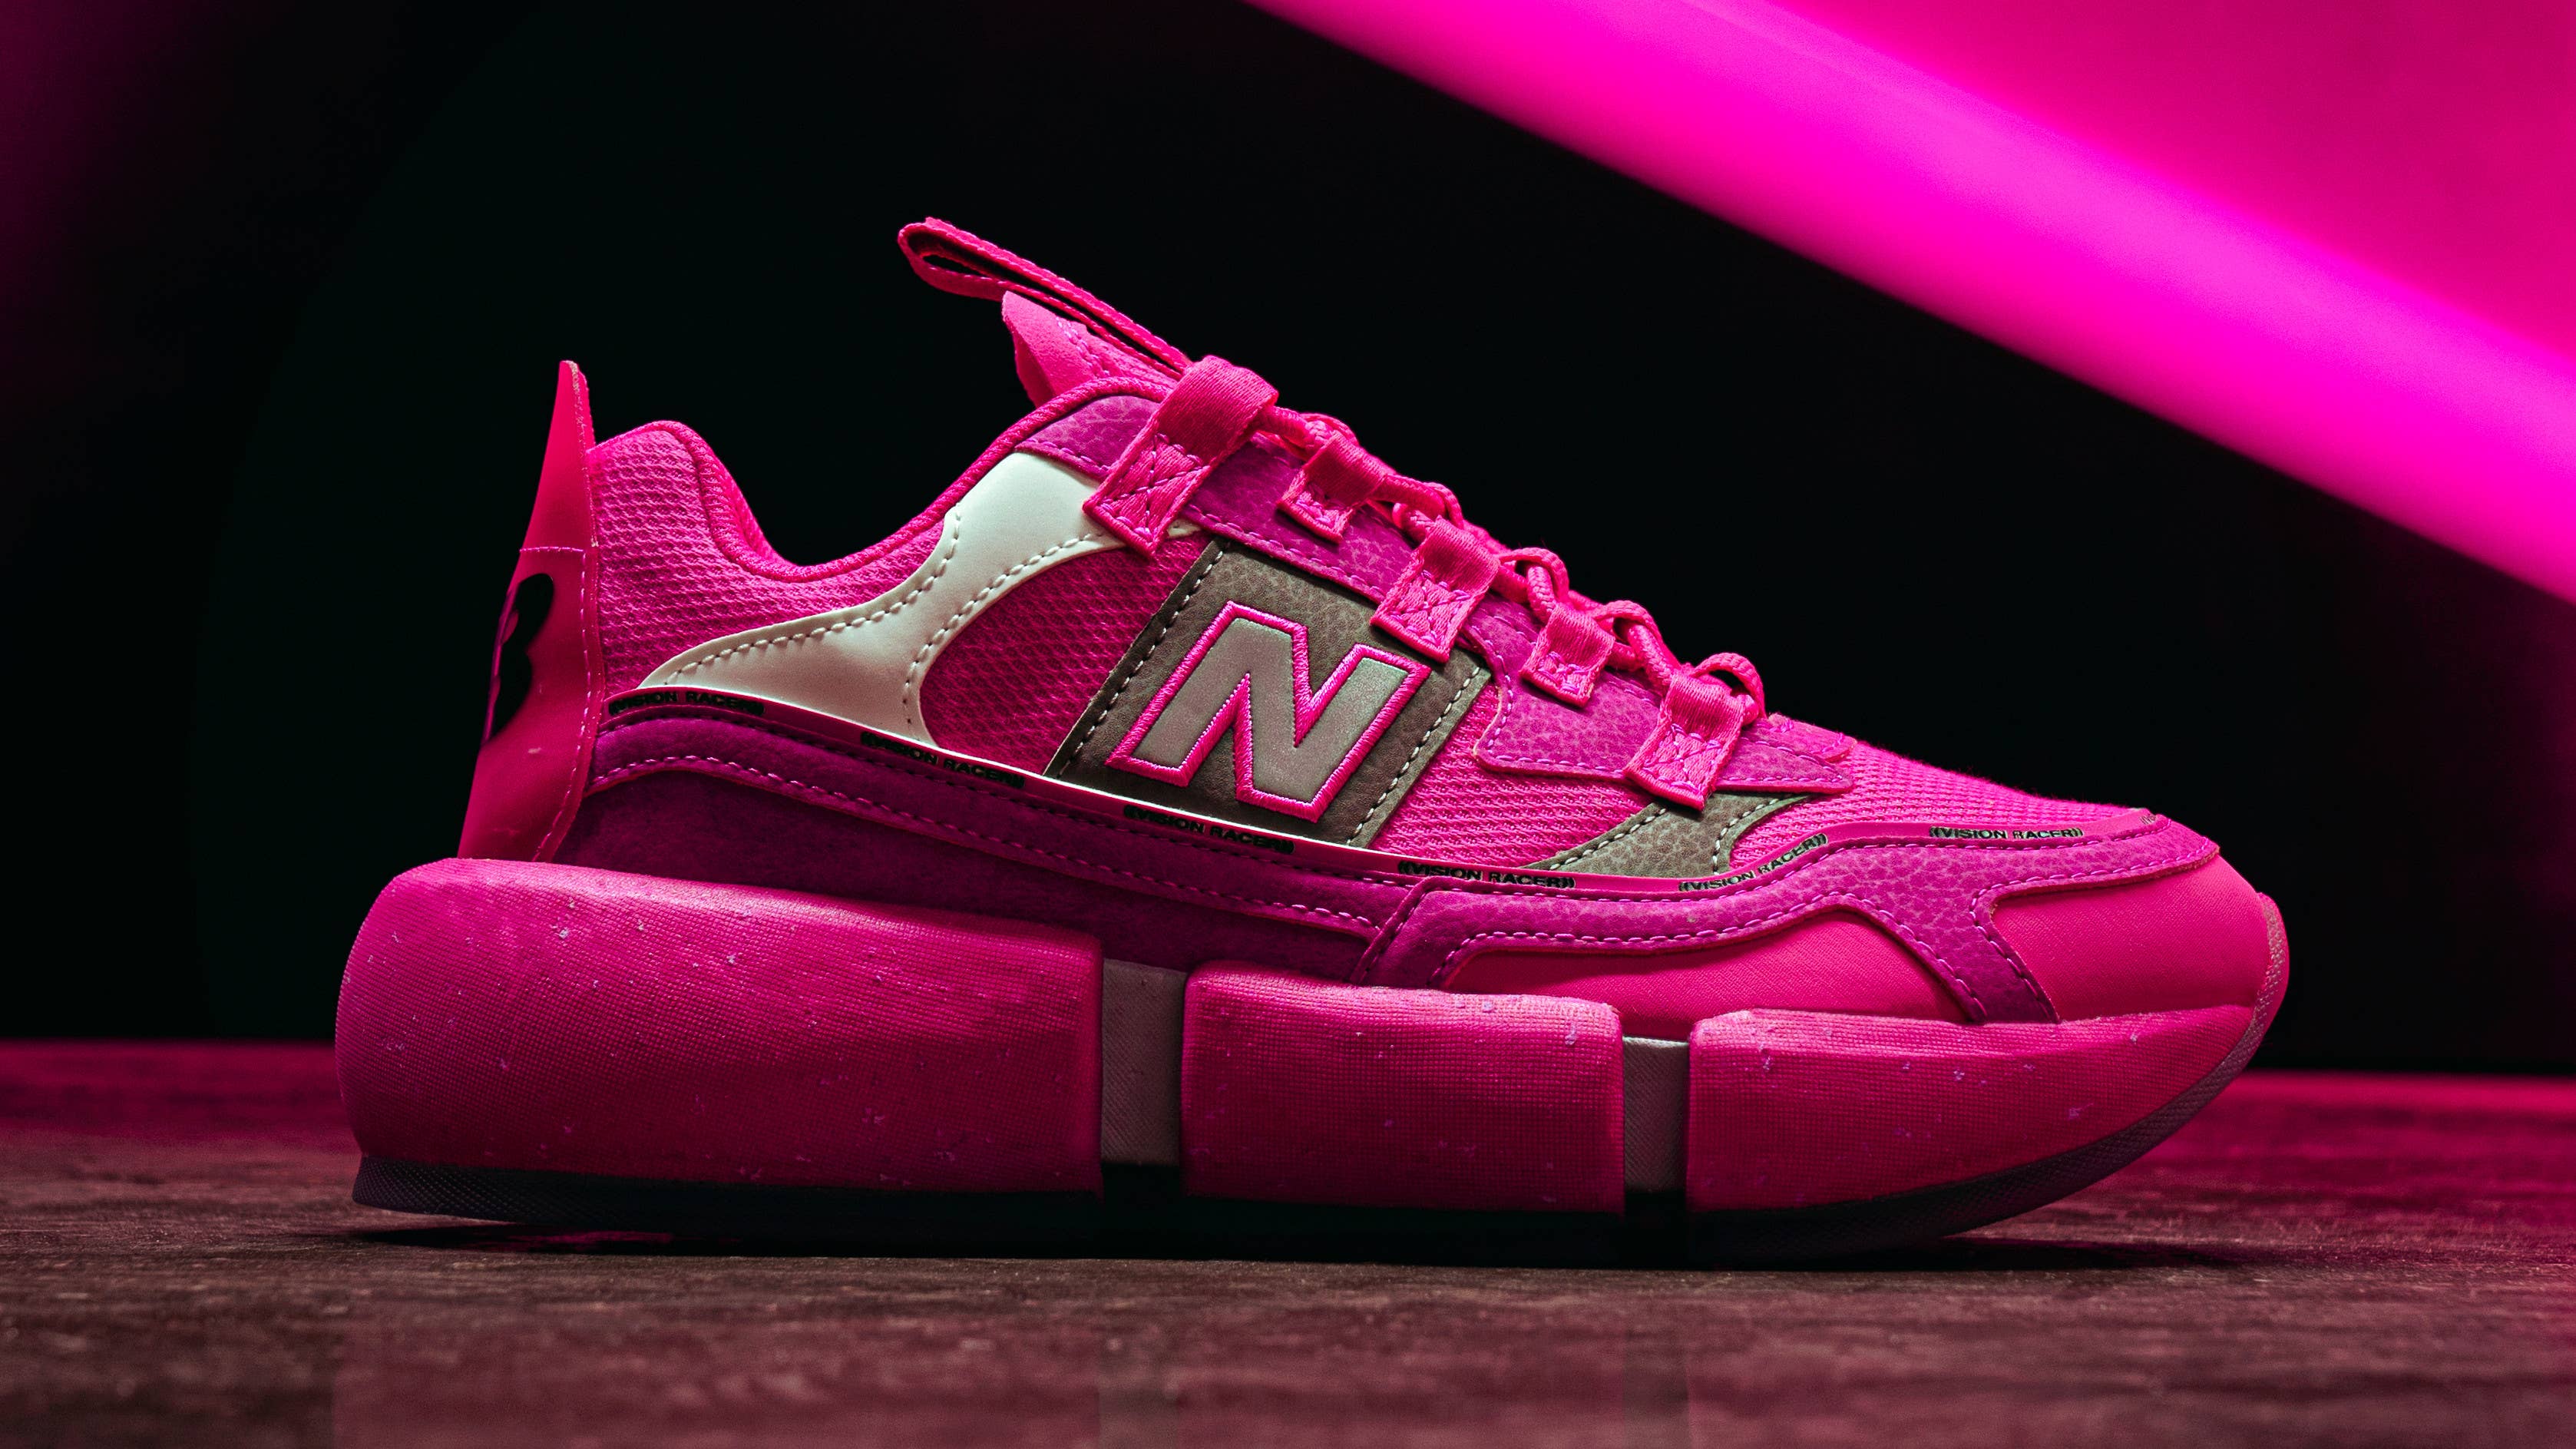 Jaden Smith x New Balance Vision Racer 'Pink' MSVRCJSC Lateral